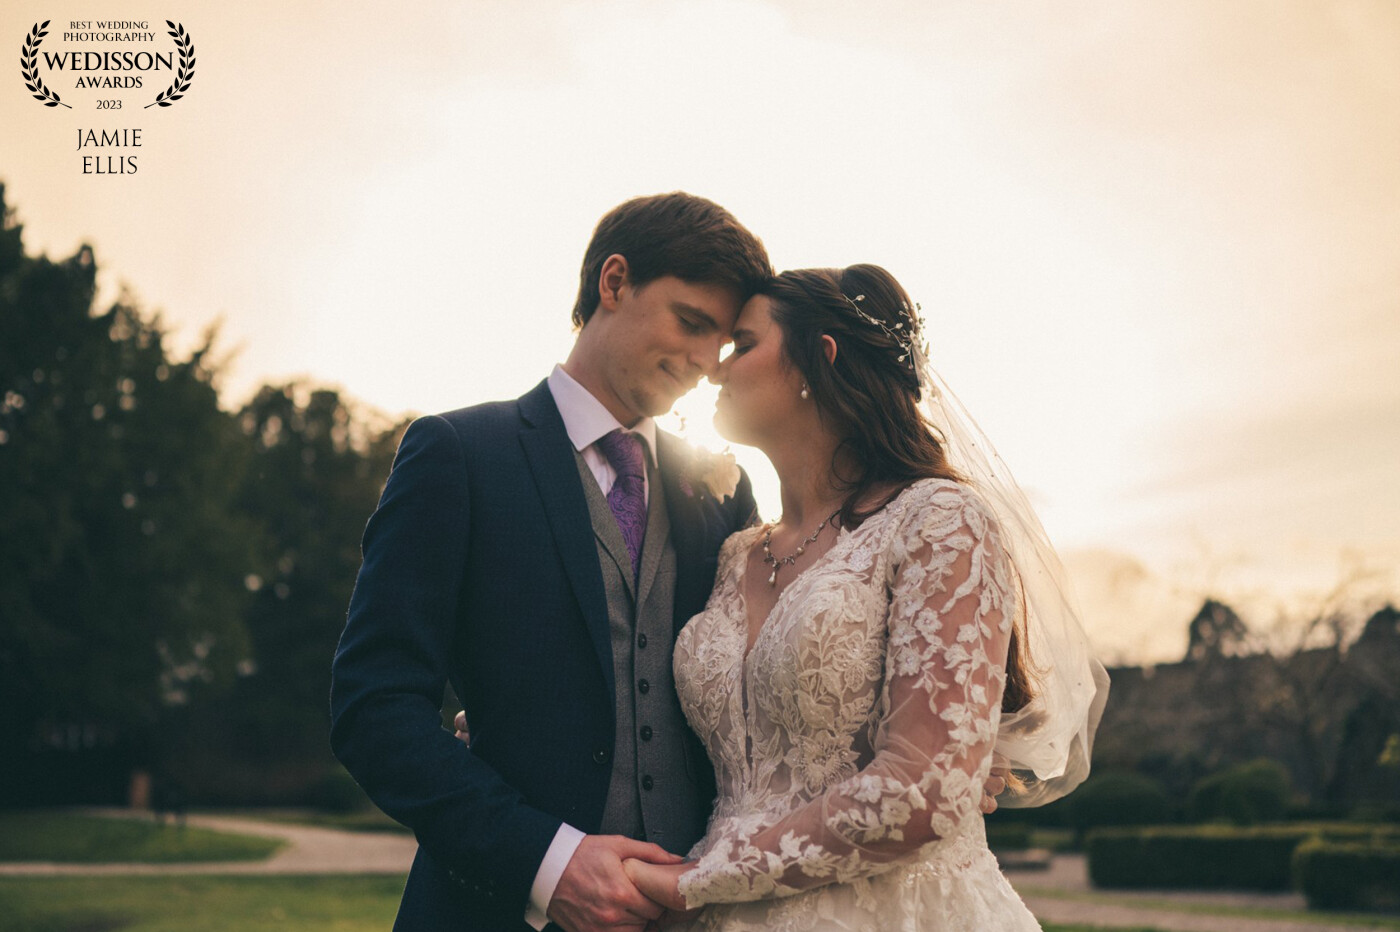 Sometimes the sunlight is just right and it shone perfectly for this lovely shot of Rebecca & Robert.